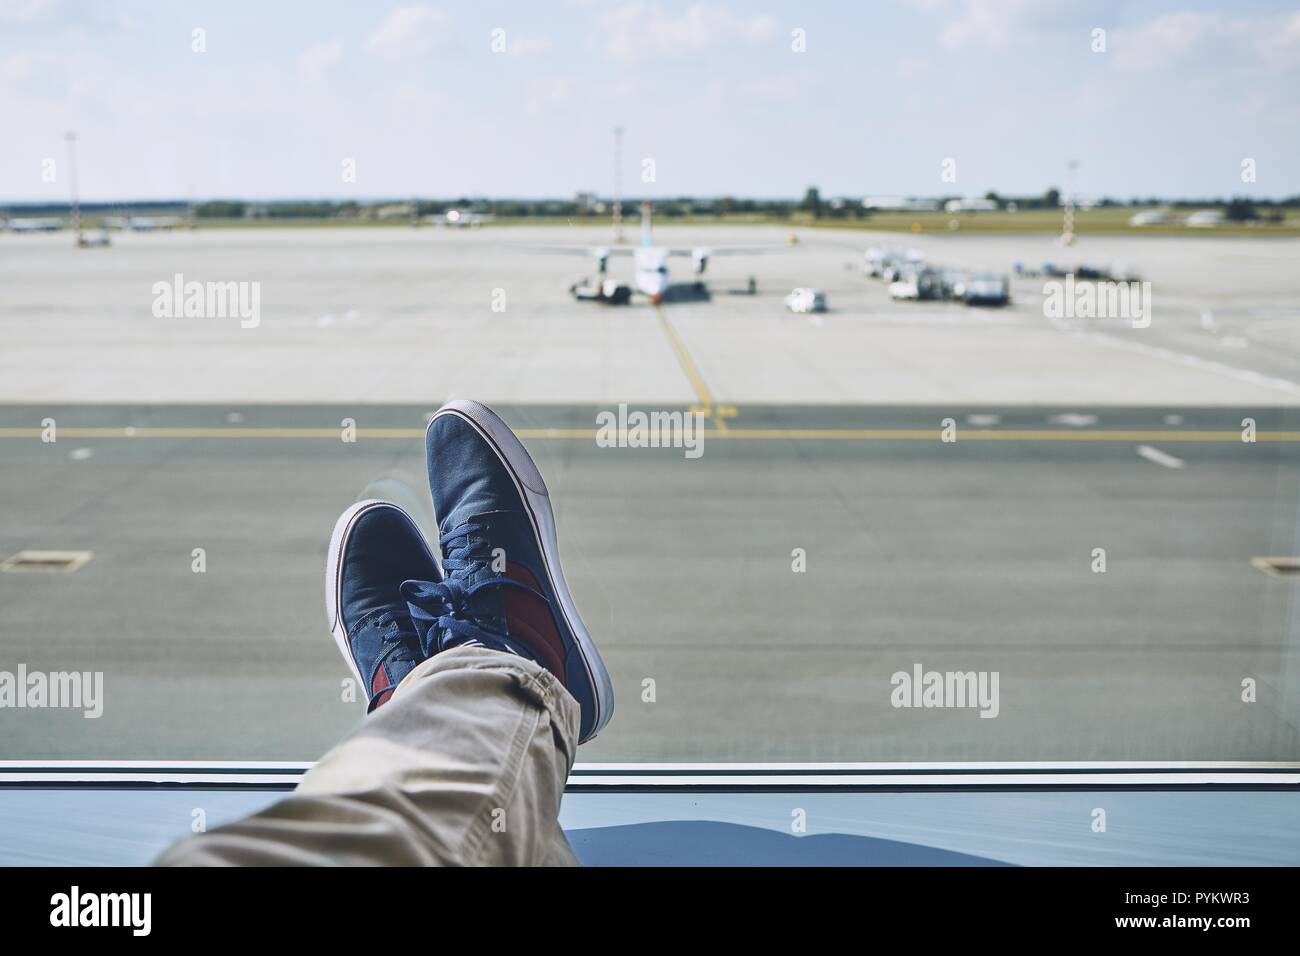 Man waiting at airport. Personal perspective of traveler from window to taxiways and runway. Stock Photo